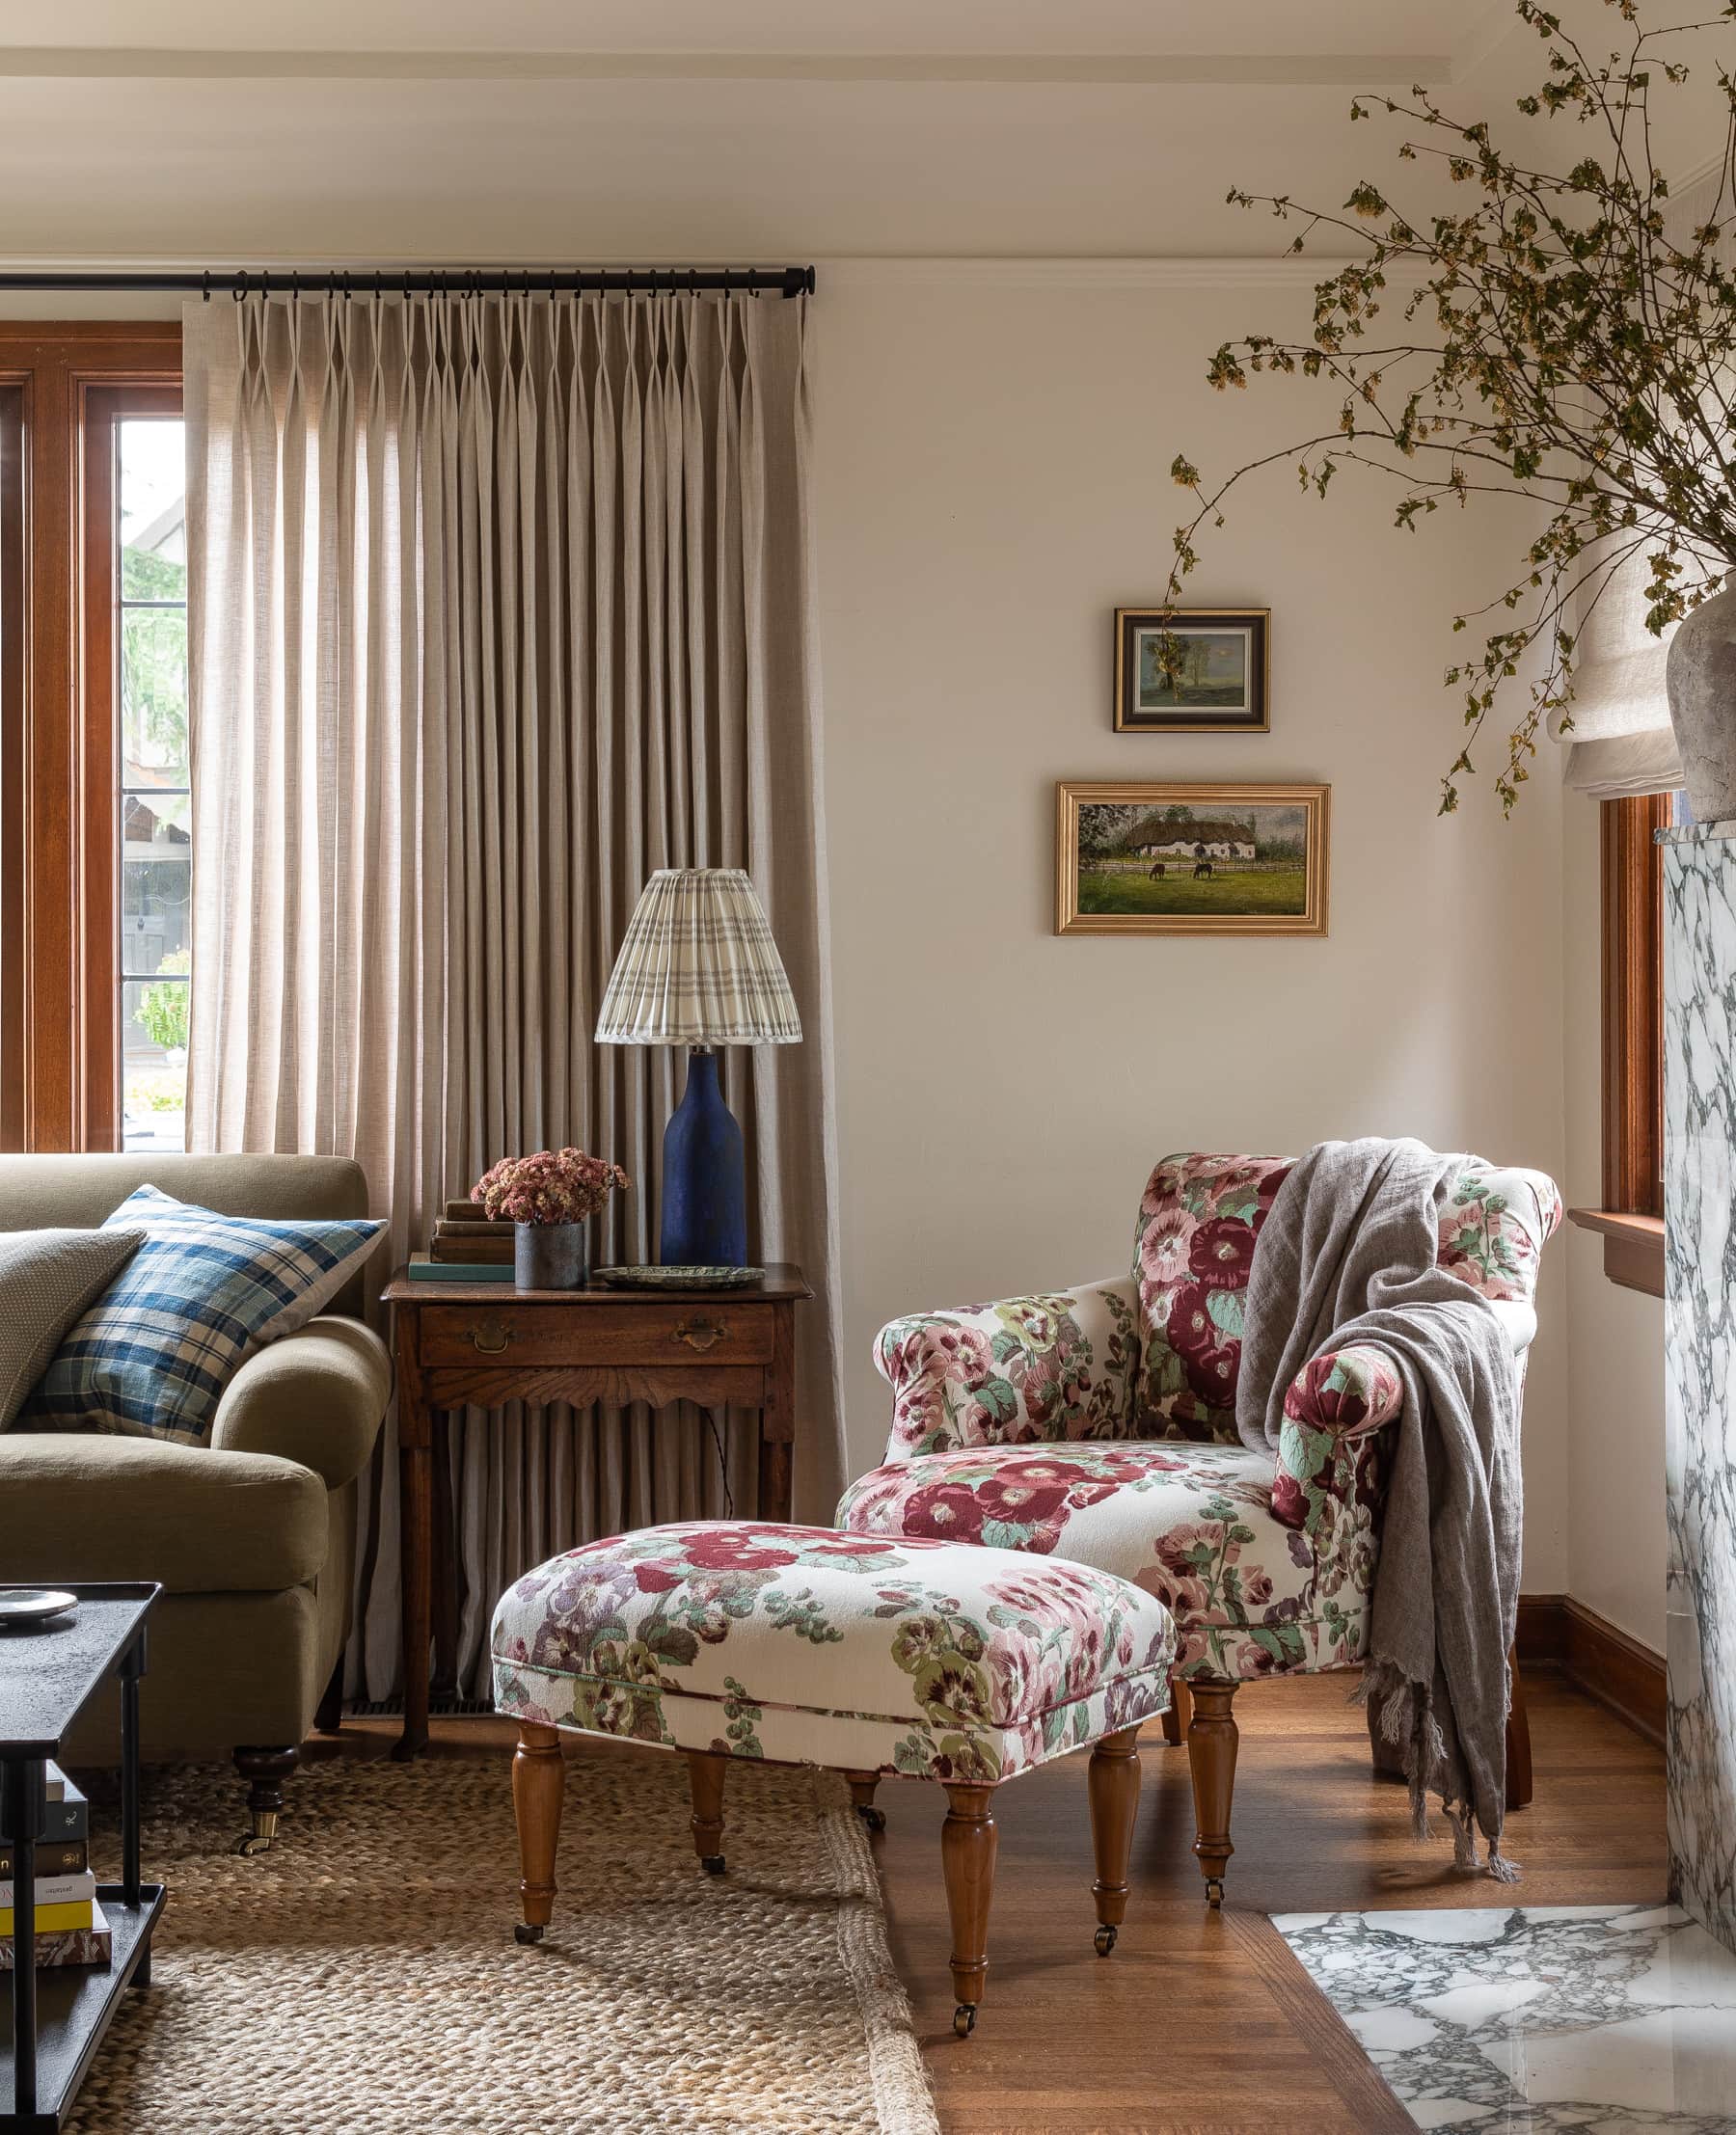 home tour featuring a dining room with showcasing a floral patterned armchair in a vintage cottage decor